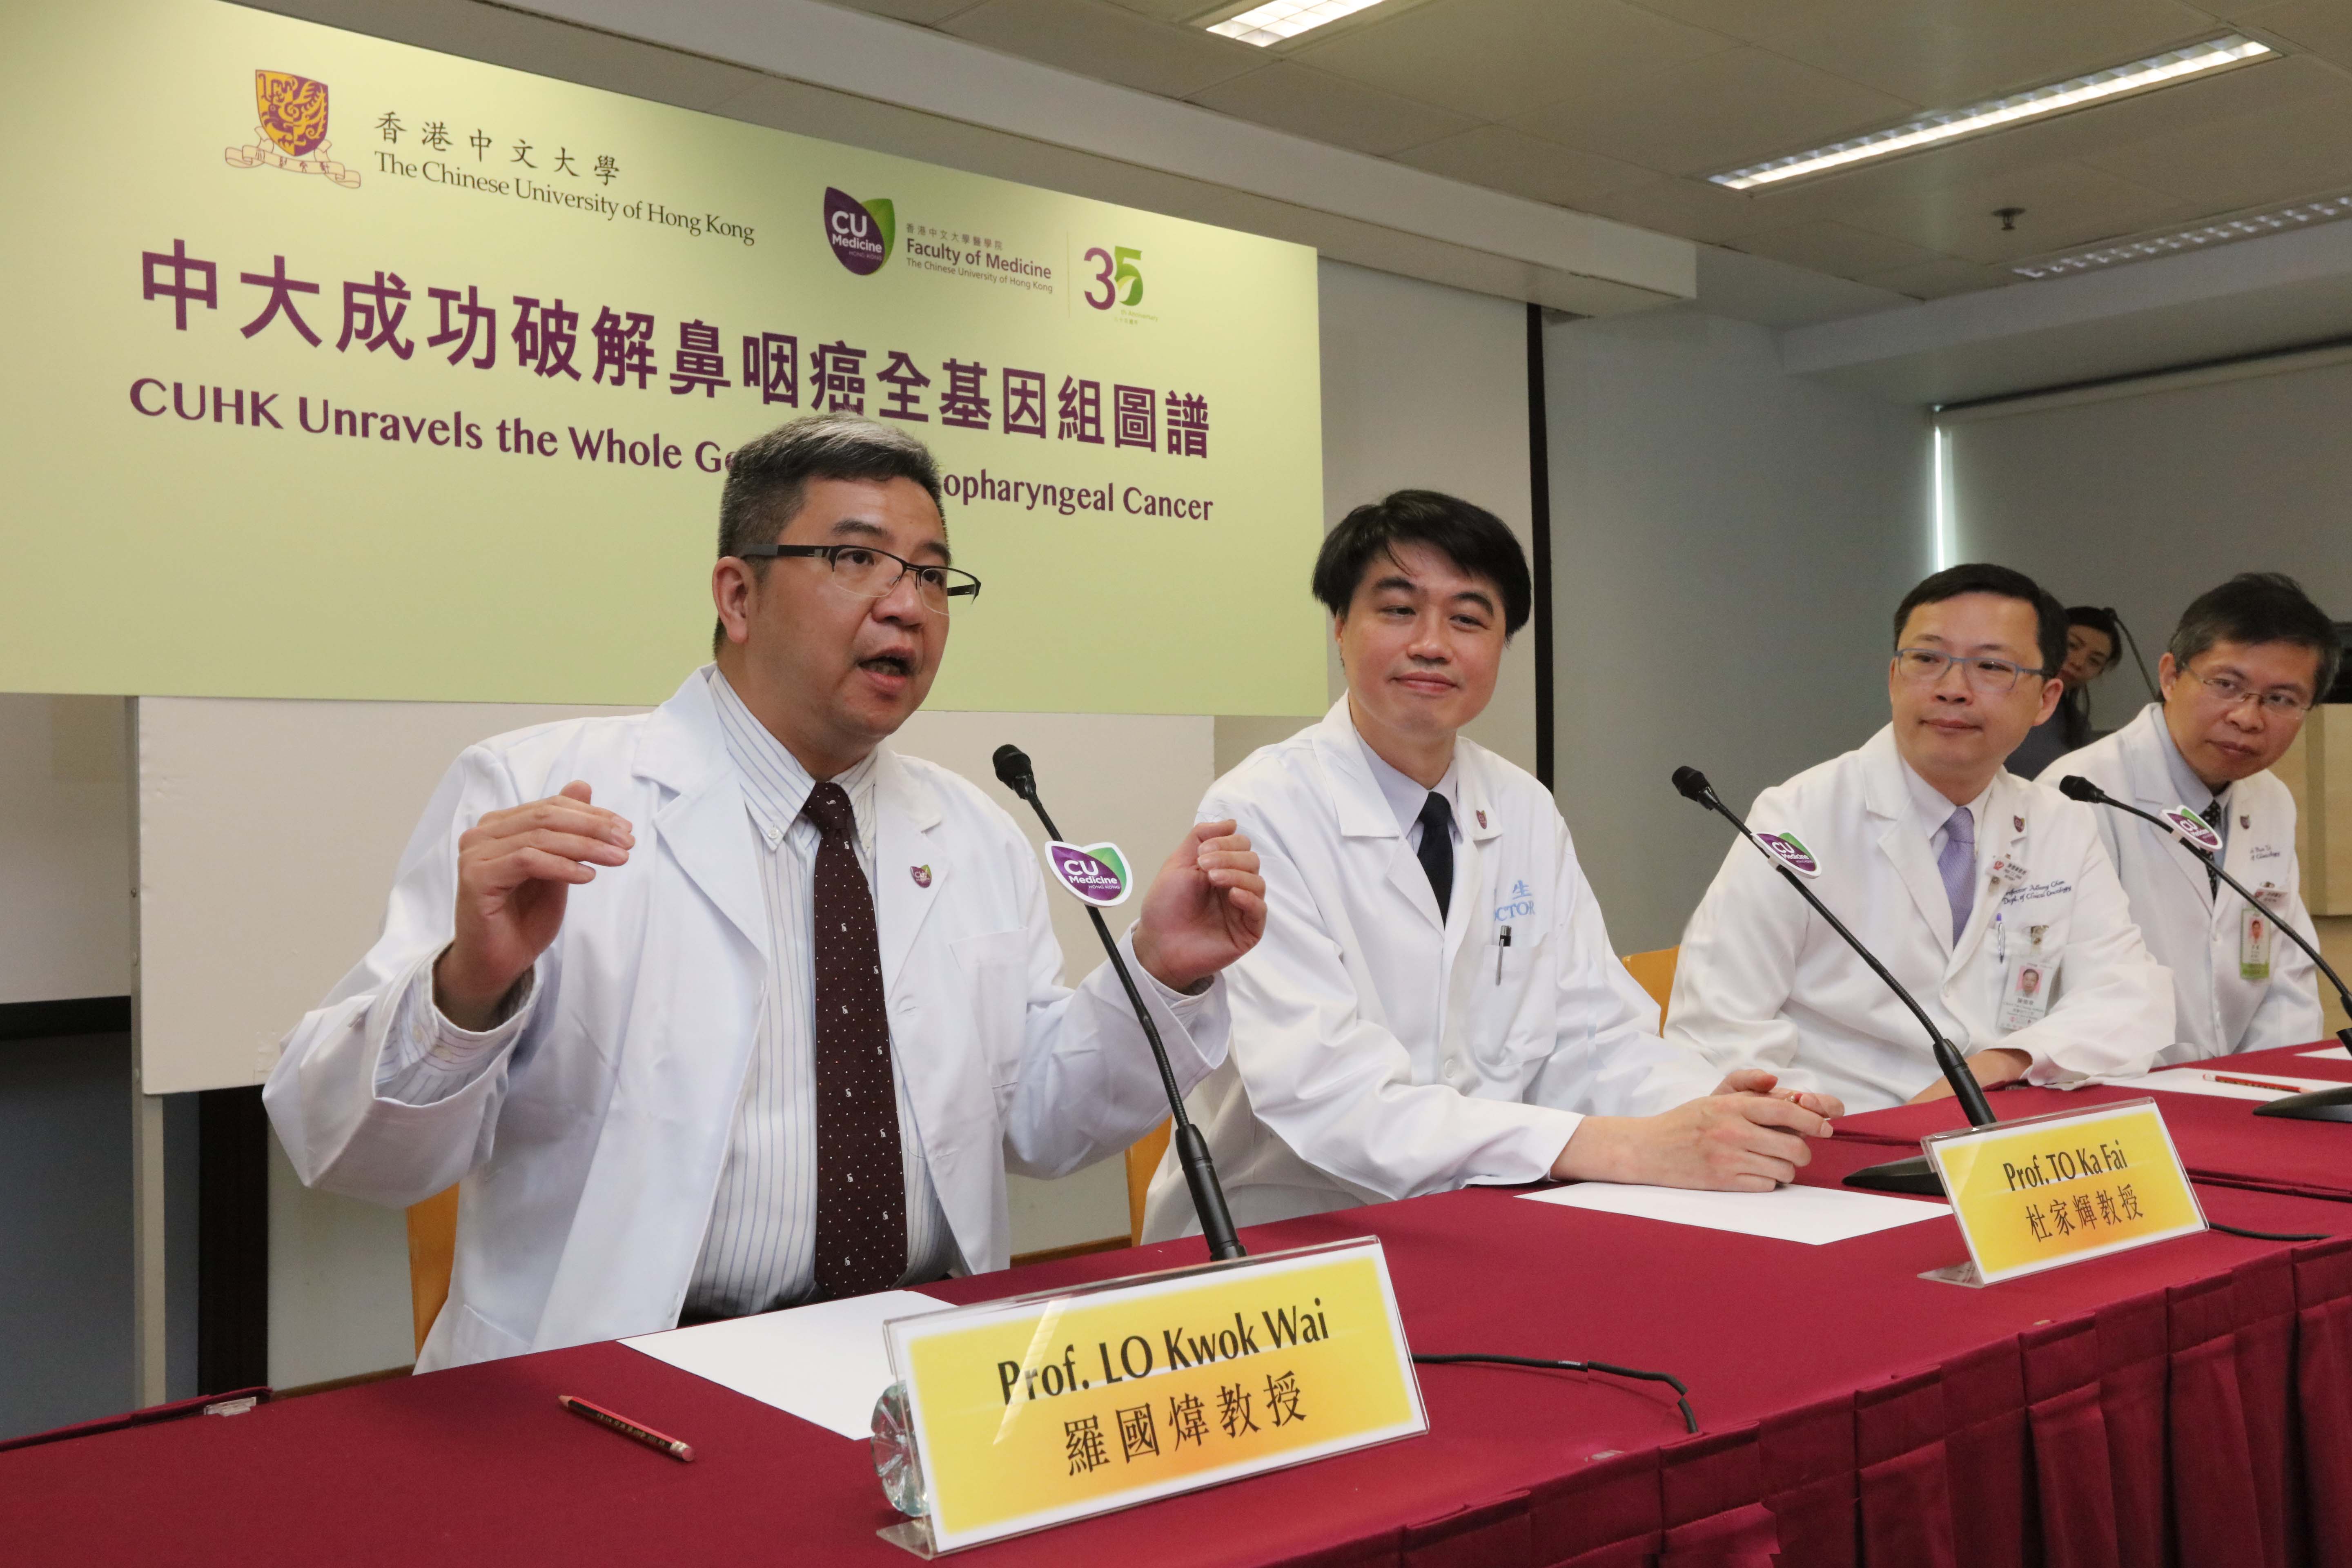 (1st from left) Prof. LO Kwok Wai states that the recent study demonstrated nasopharyngeal carcinoma (NPC) genomics may help doctors to assess patient’s prognosis after receiving a certain kind of therapy. It also highlights the importance of targeting activated NF-κB signaling in NPC patients with somatic defects in NF-κB regulators, envision that NF-κB inhibitors could be potentially used as new therapeutics for NPC patients.